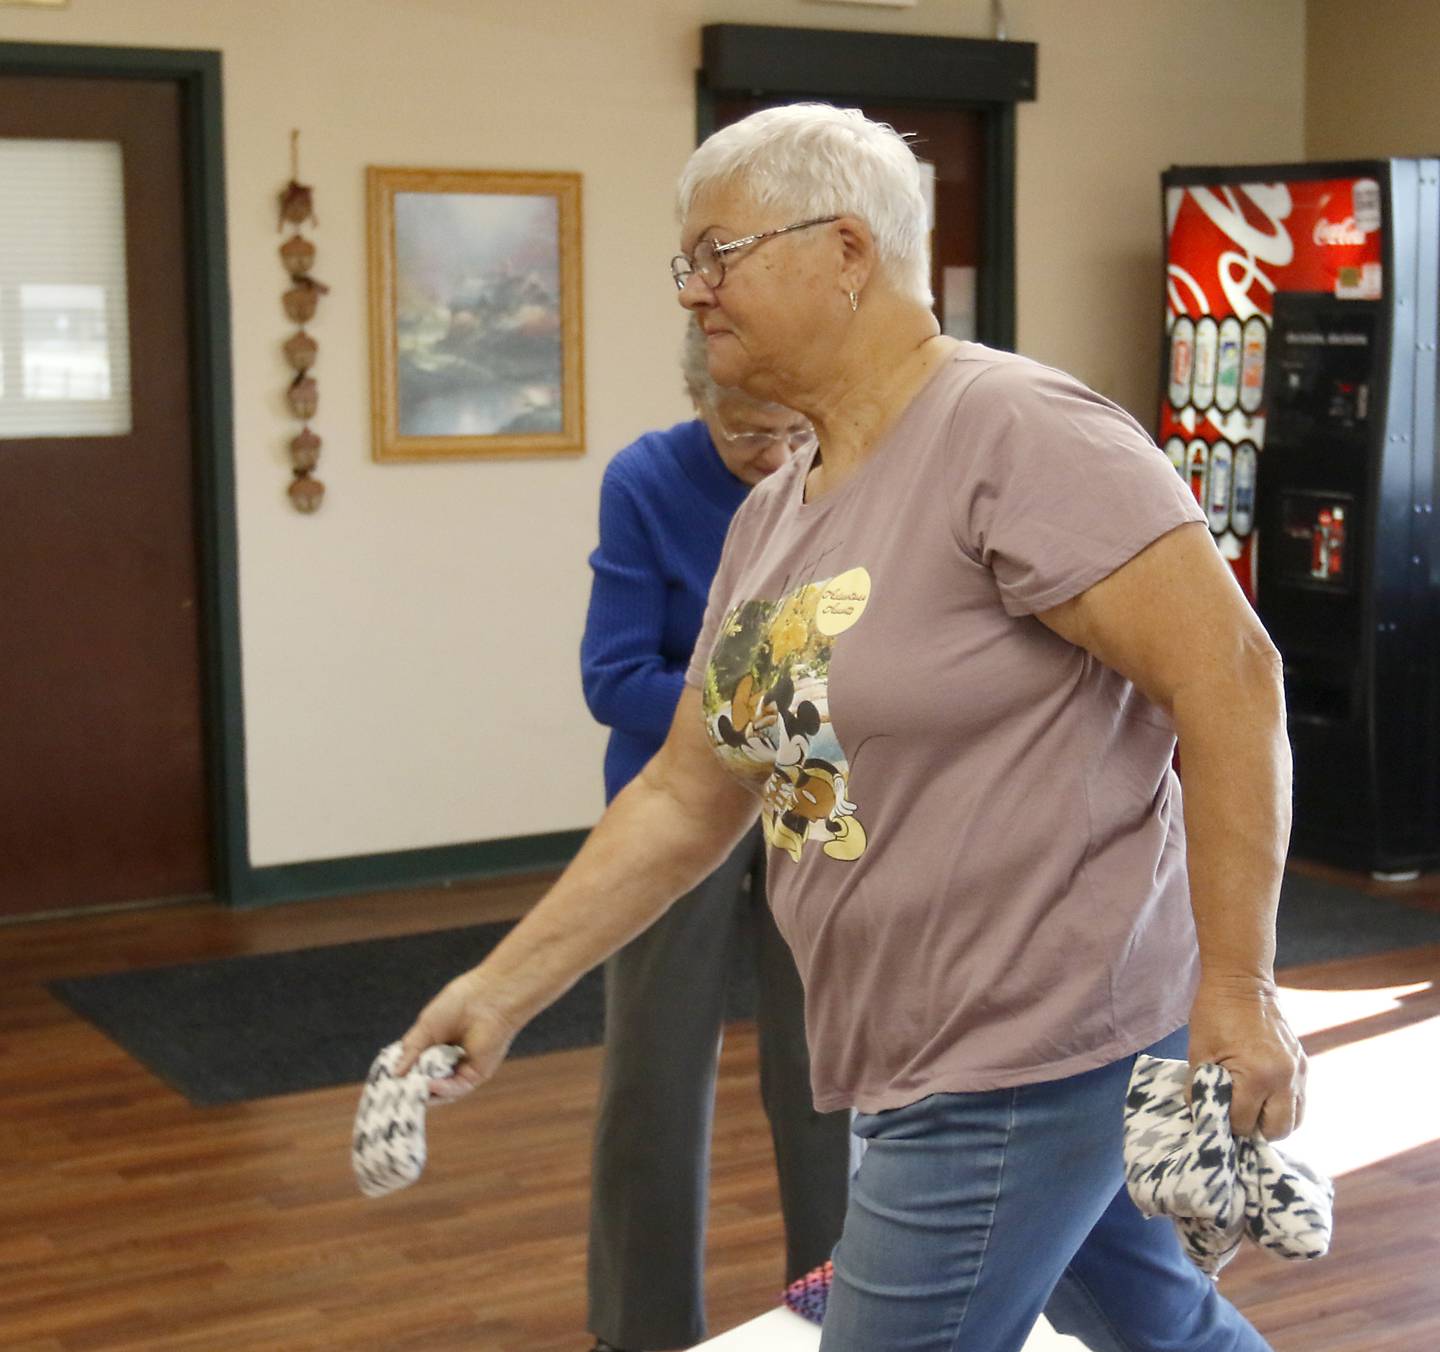 Carol Toussaint, of Johnsburg, tosses a bag while playing bags with Marie Wasil, of McHenry, Tuesday, Nov. 1, 2022, at the senior center in McHenry Township. About 70 million Social Security recipients will see a raise in their benefits to help keep up with inflation.